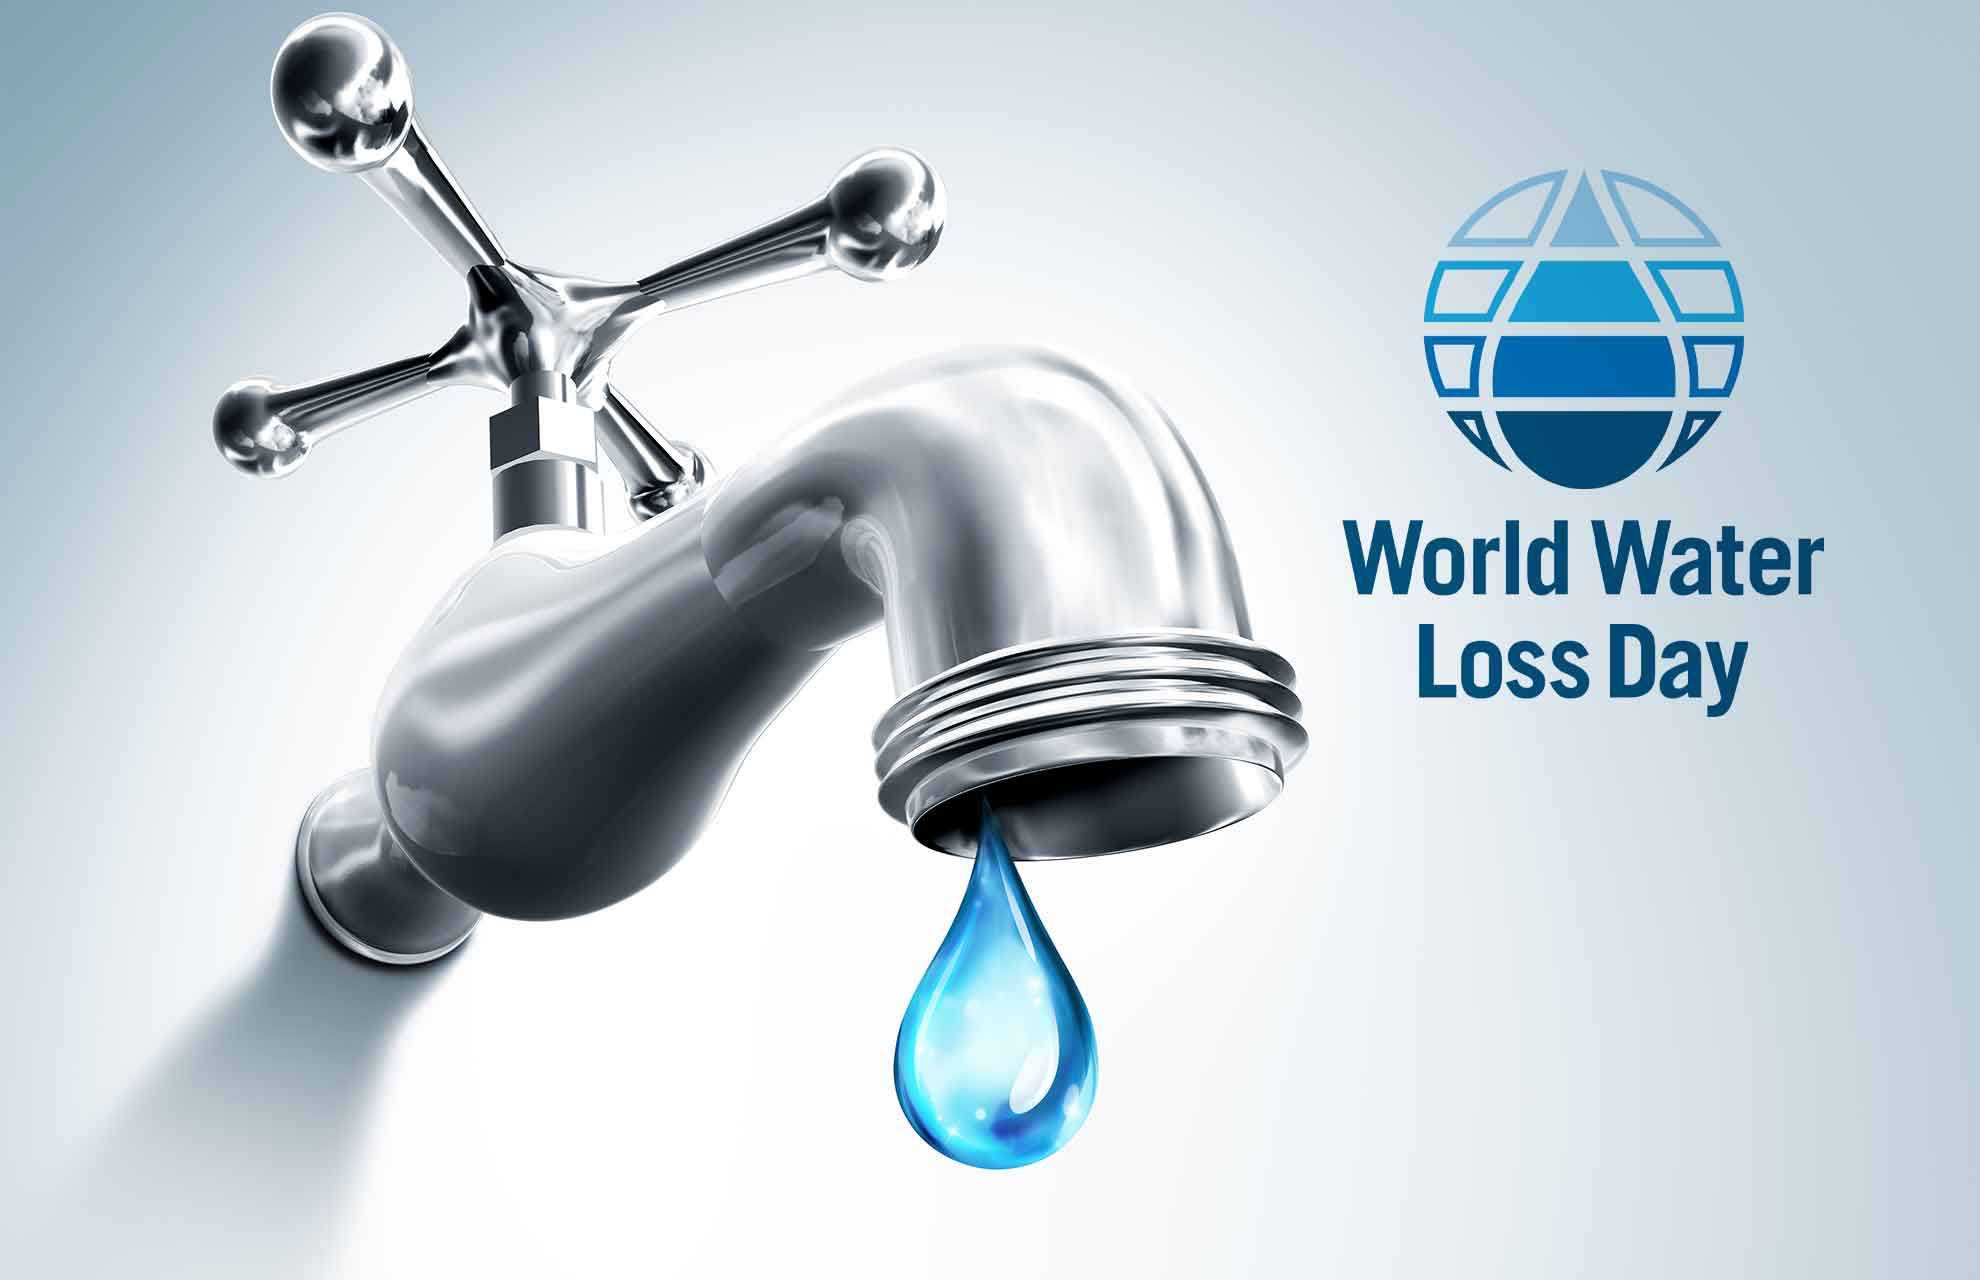 Orbis Intelligent Systems Honors World Water Loss Day